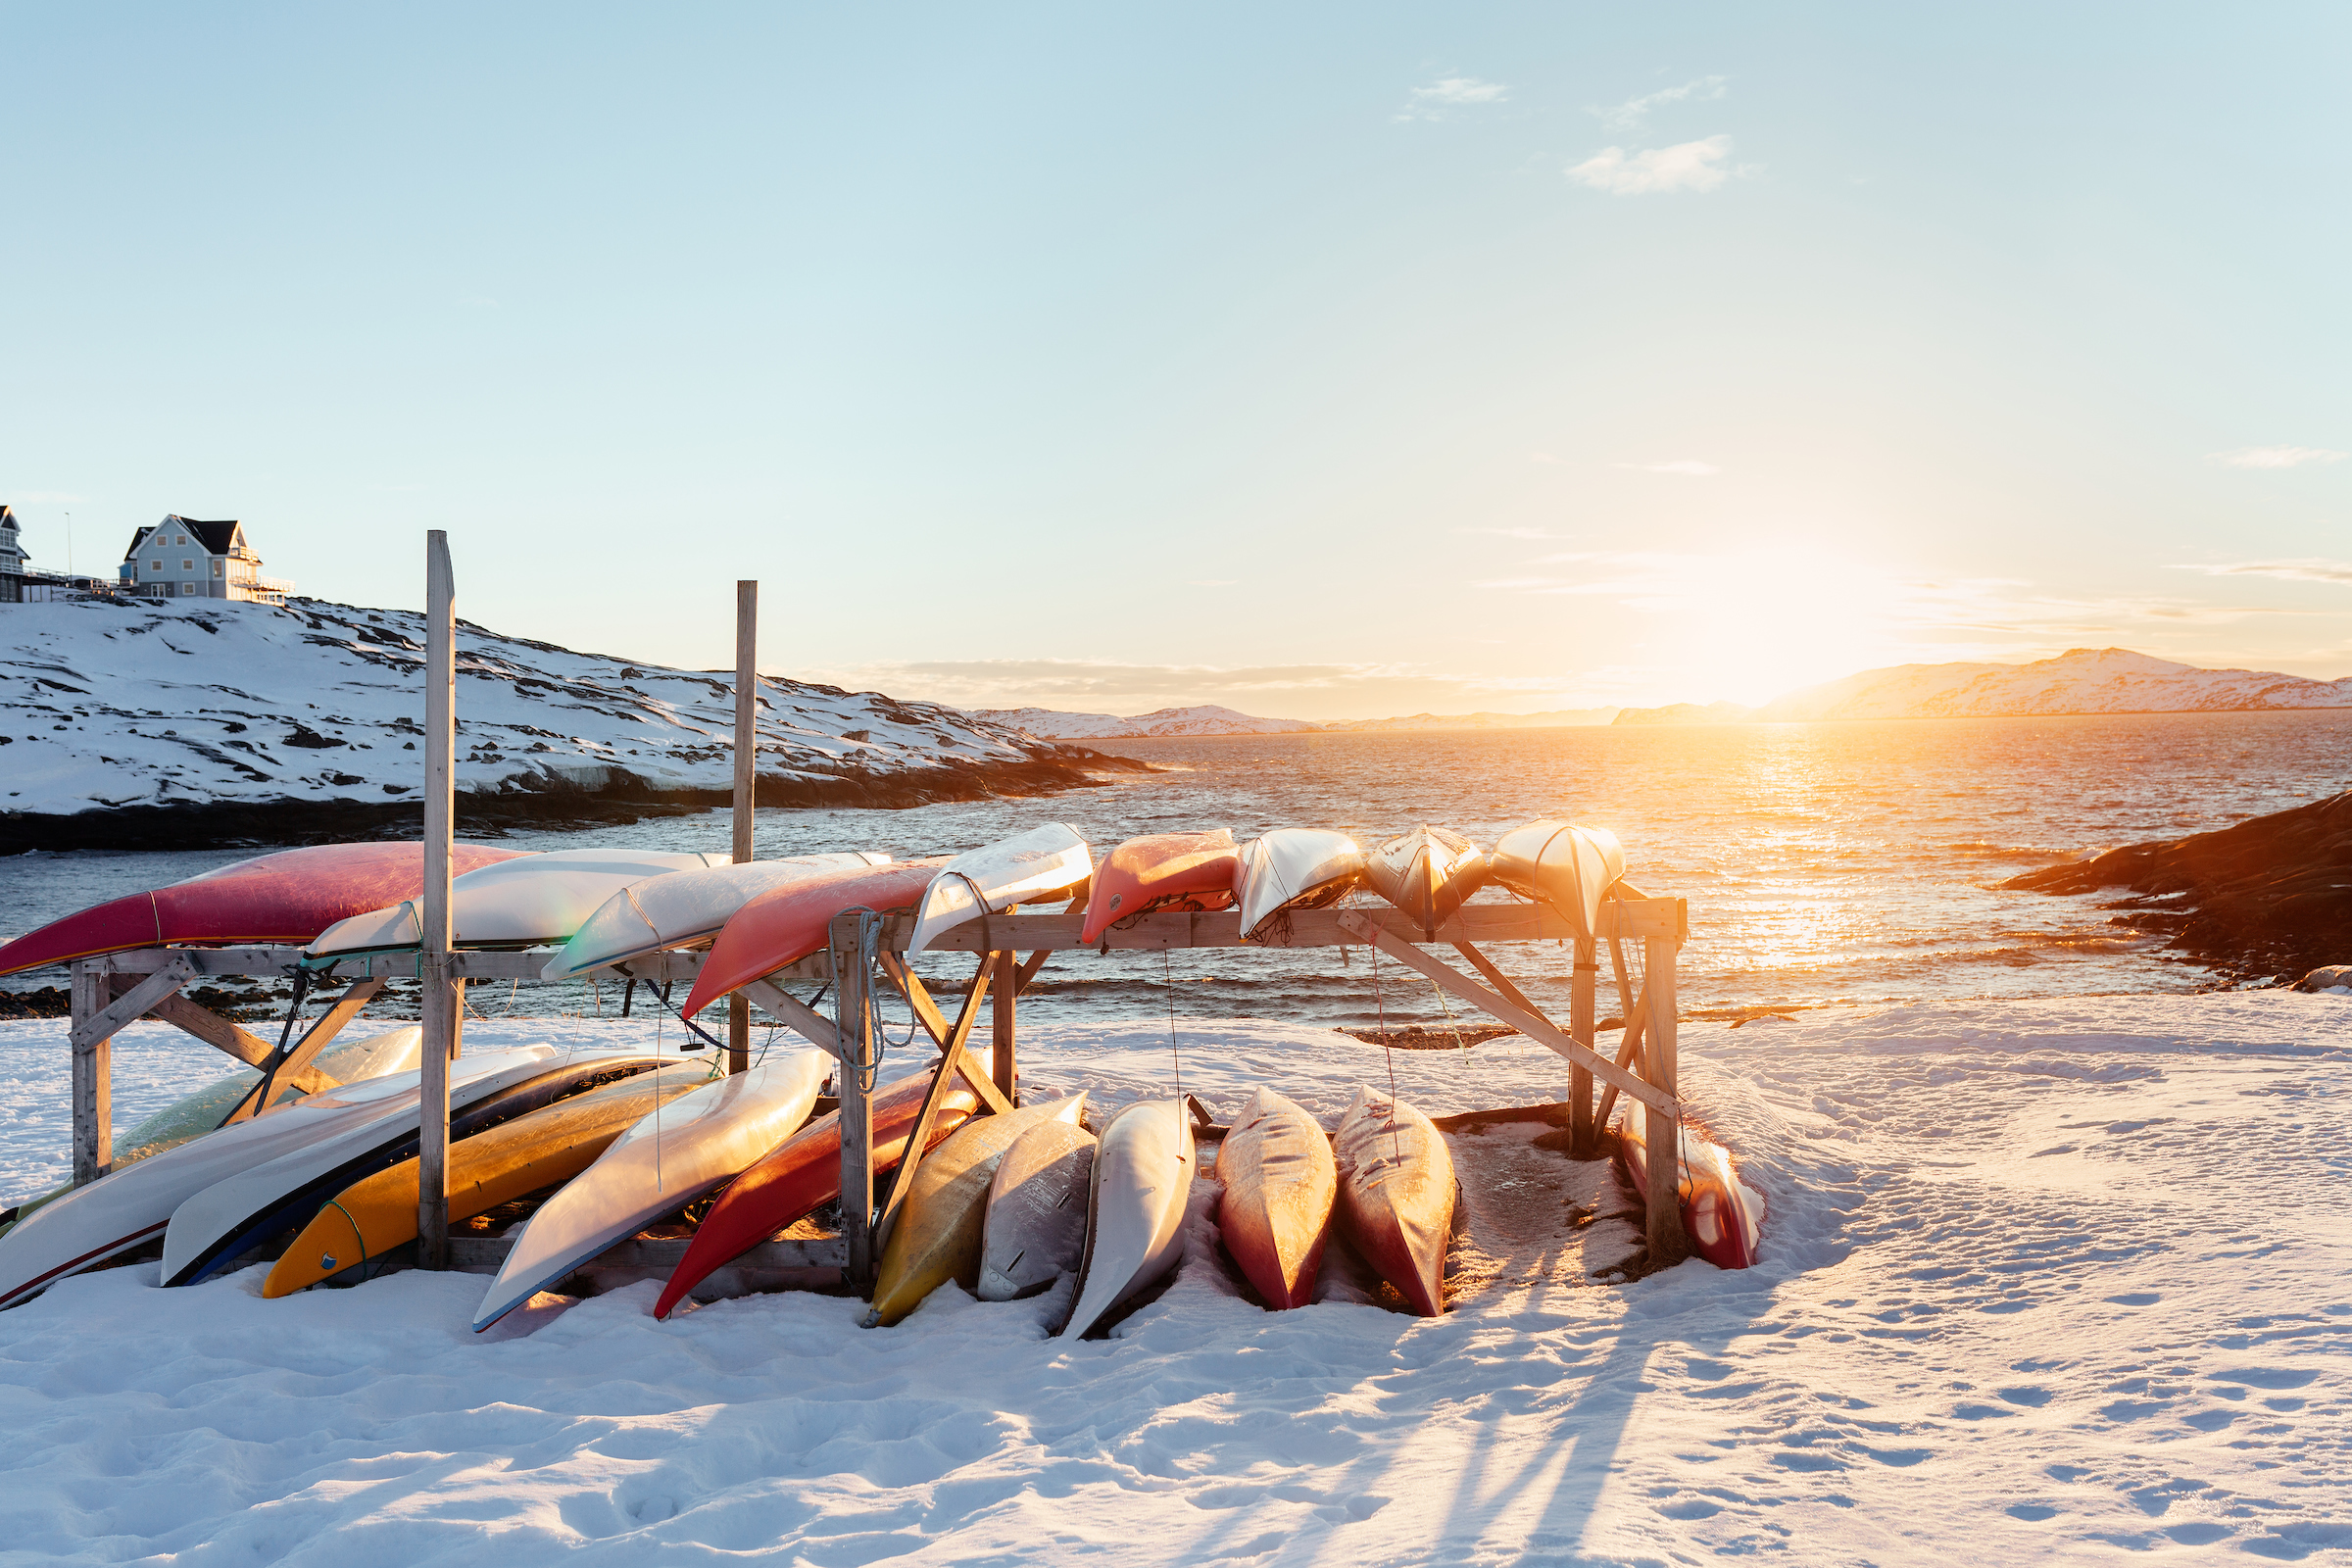 Backlit kayaks in a sunset scene in Nuuk in Greenland. Photo by Rebecca Gustafsson - Visit Greenland.